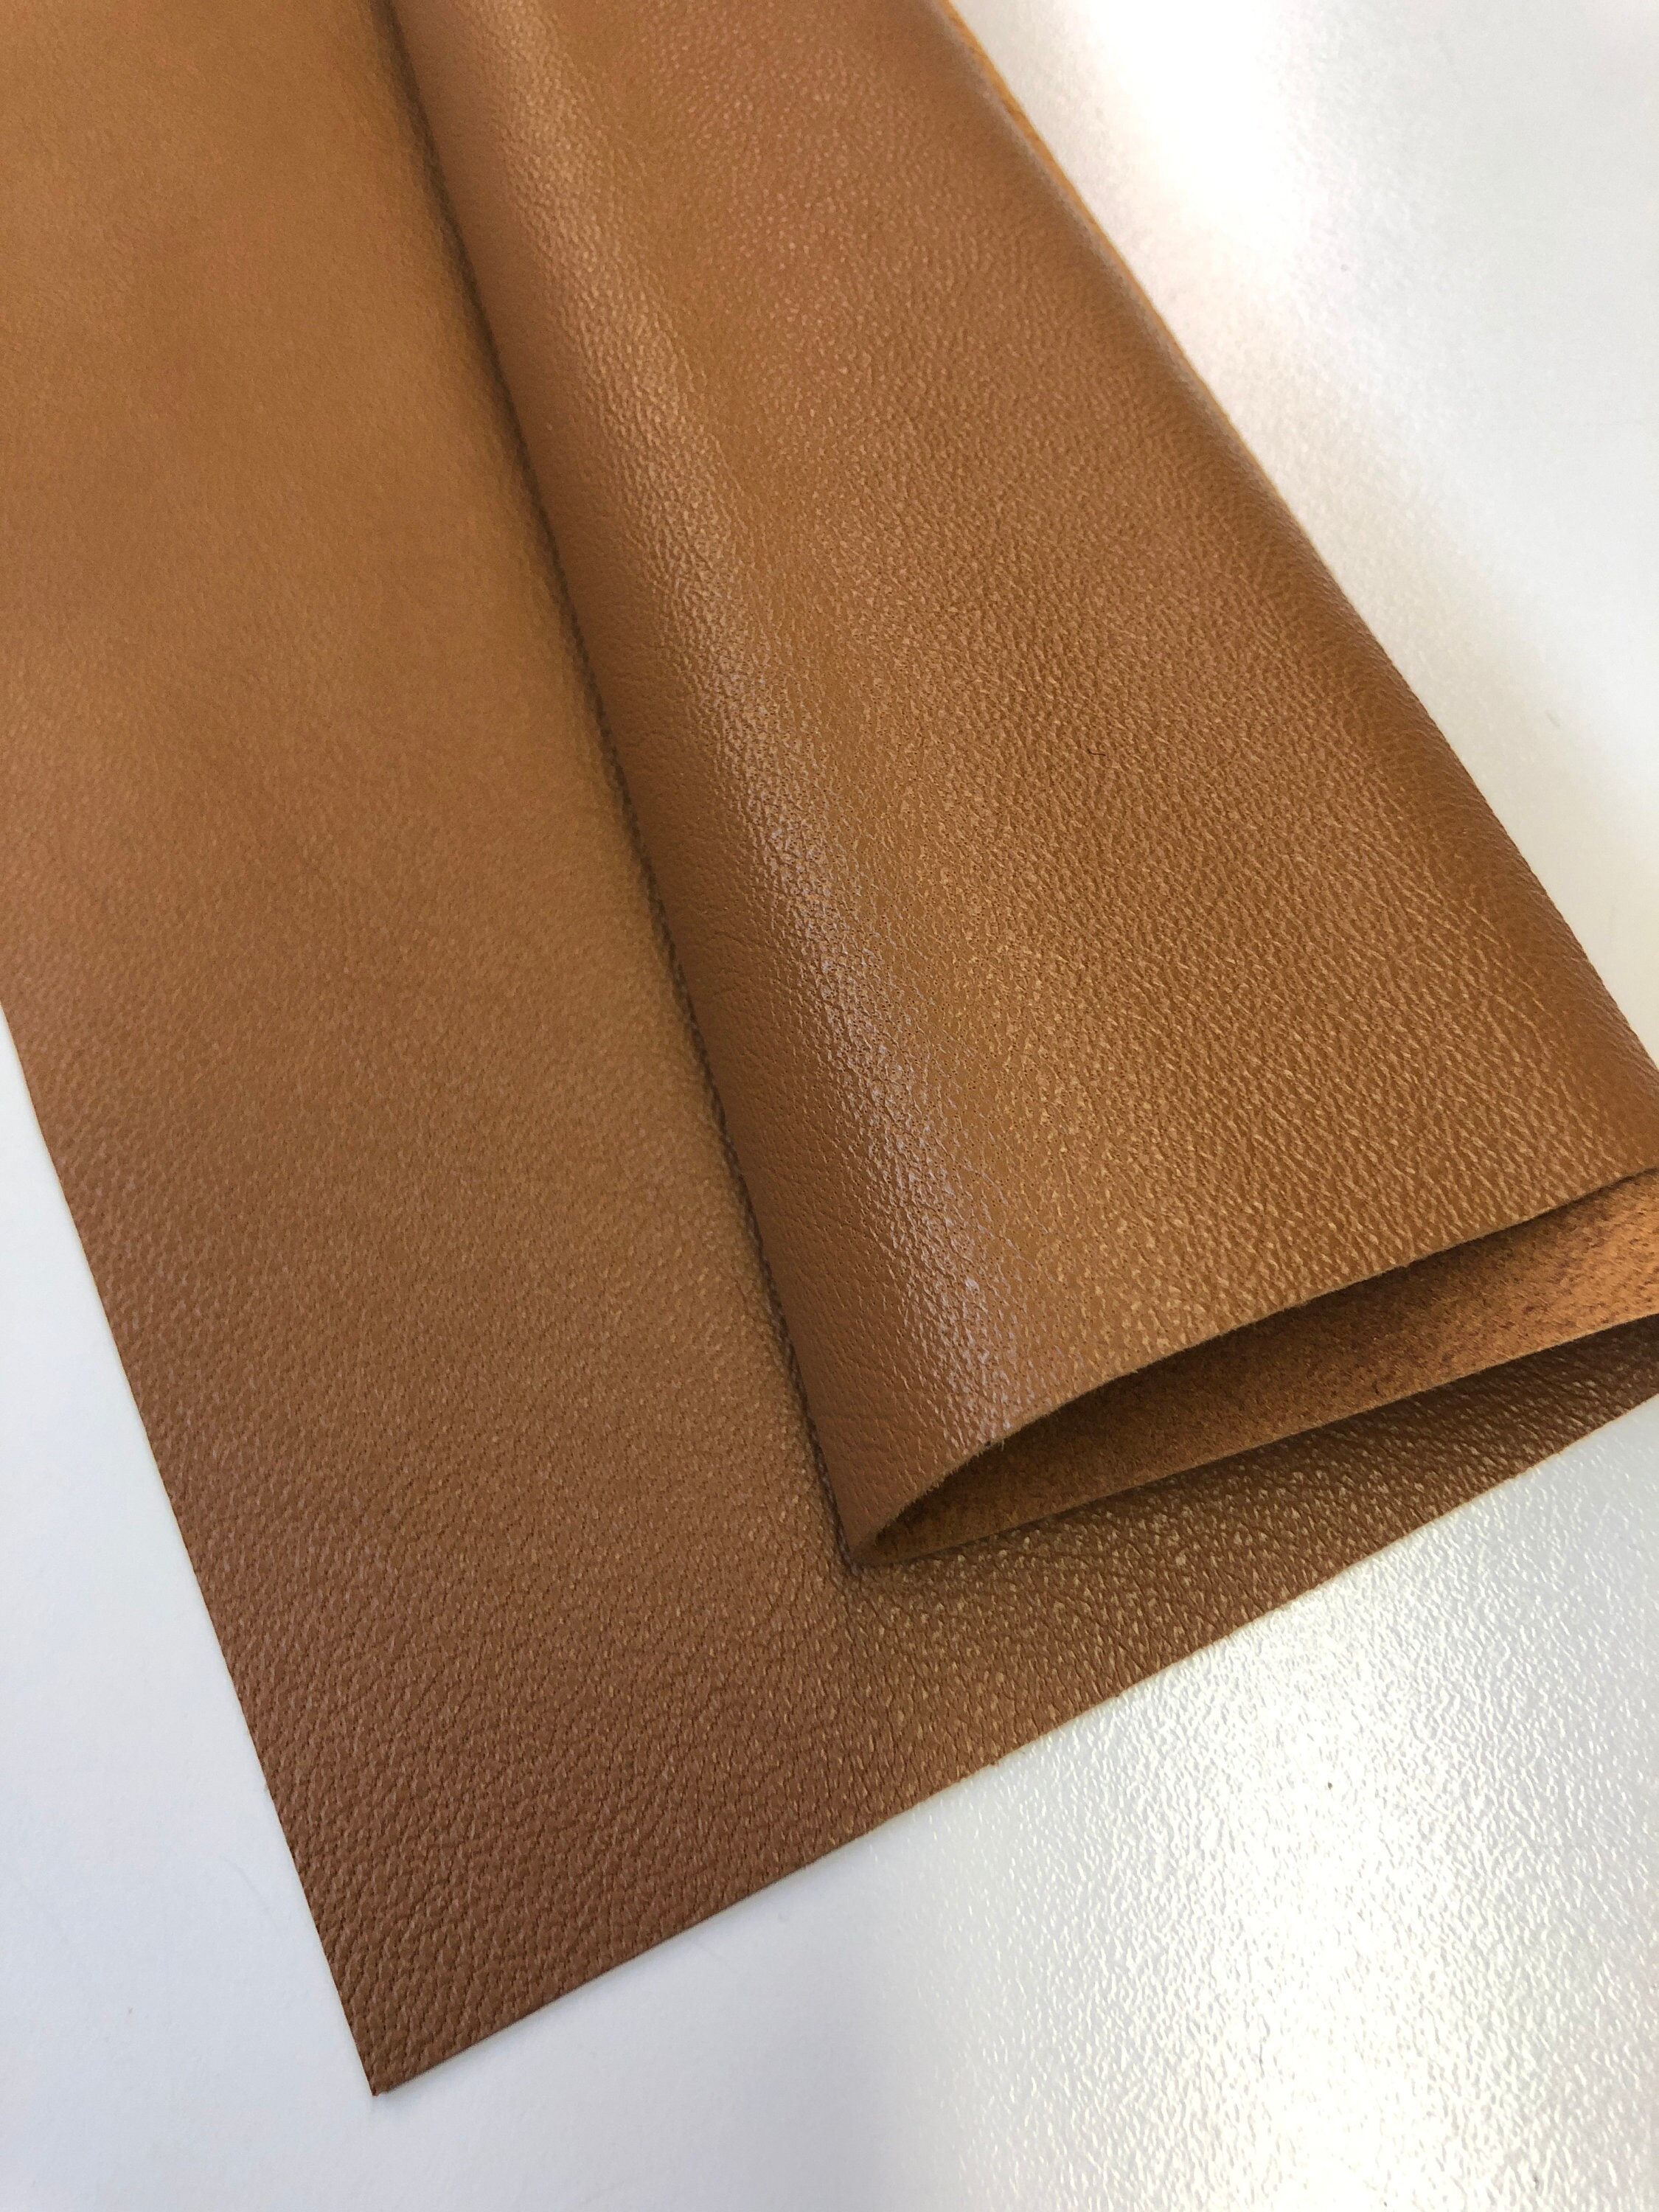 LEATHER 12x12 Natural LEATHER, Leather Sheet, Leather Skins